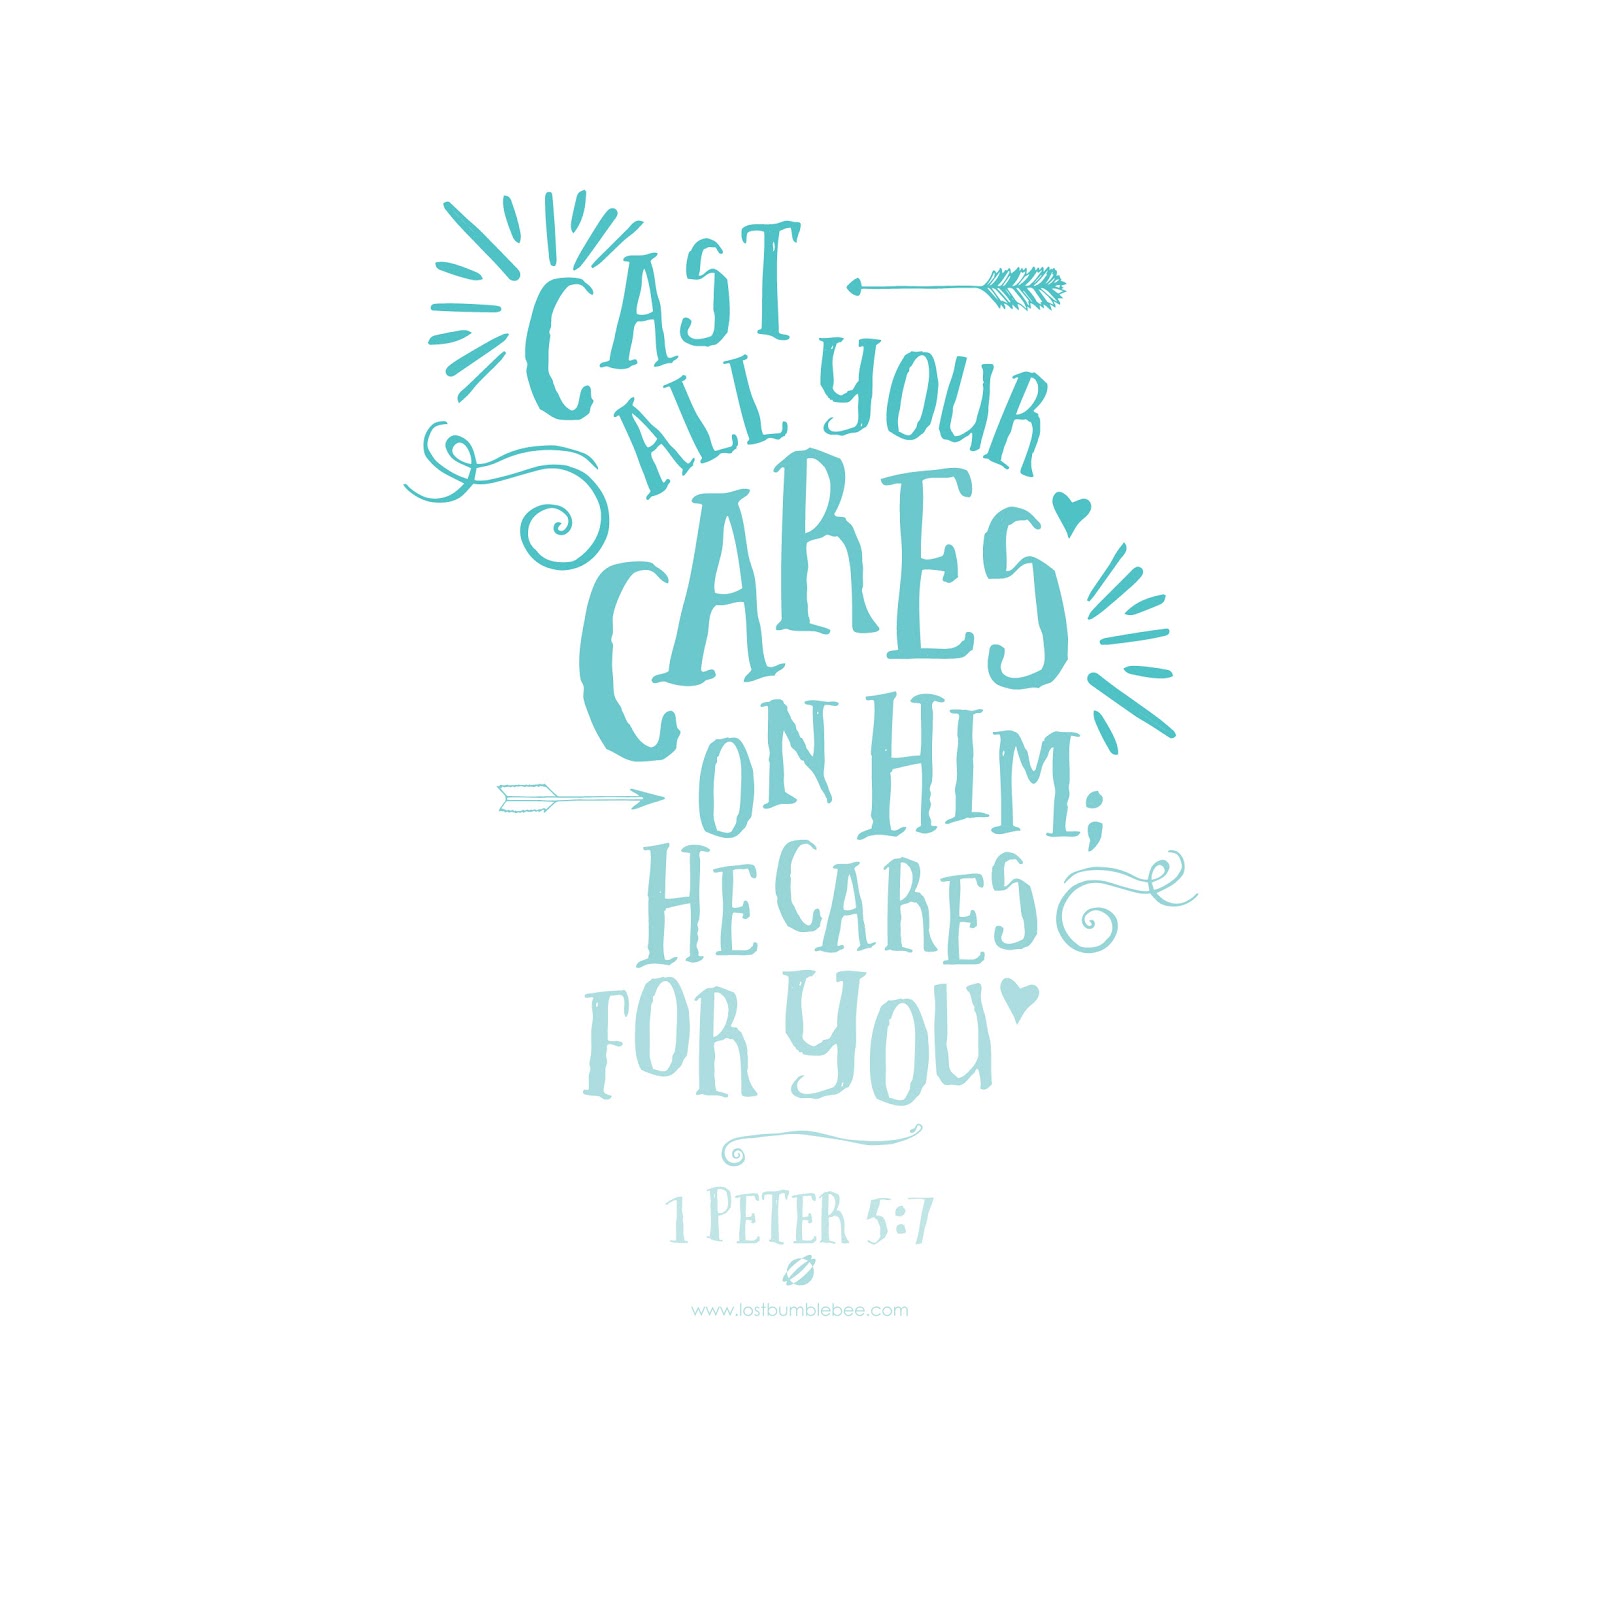 LostBumblebee ©2014 Cast Your Cares 1 Peter 5:7 iOs 7 iPad wallpaper- personal use only